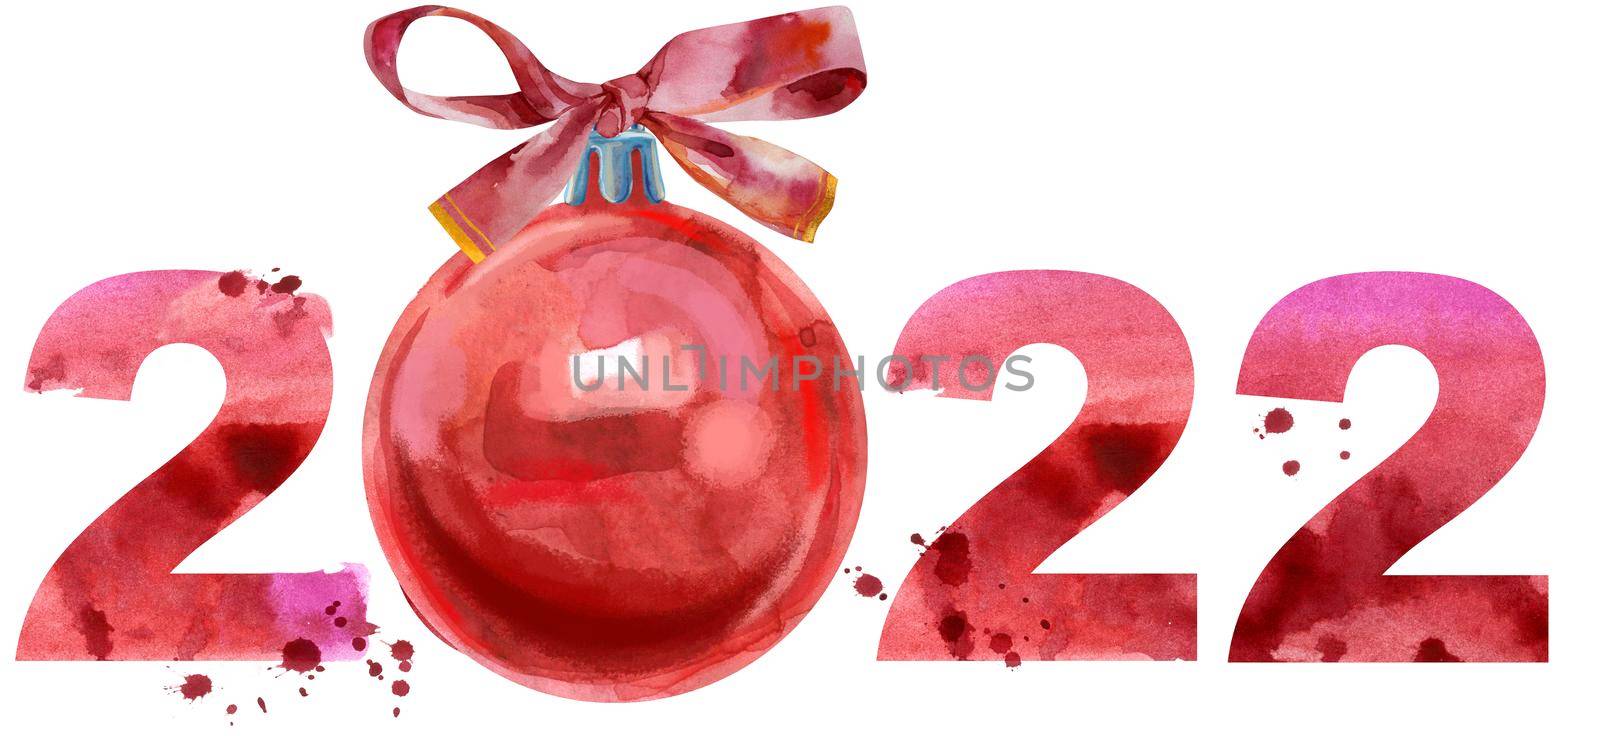 New year 2022 watercolor number with Christmas ball isolated on the white background